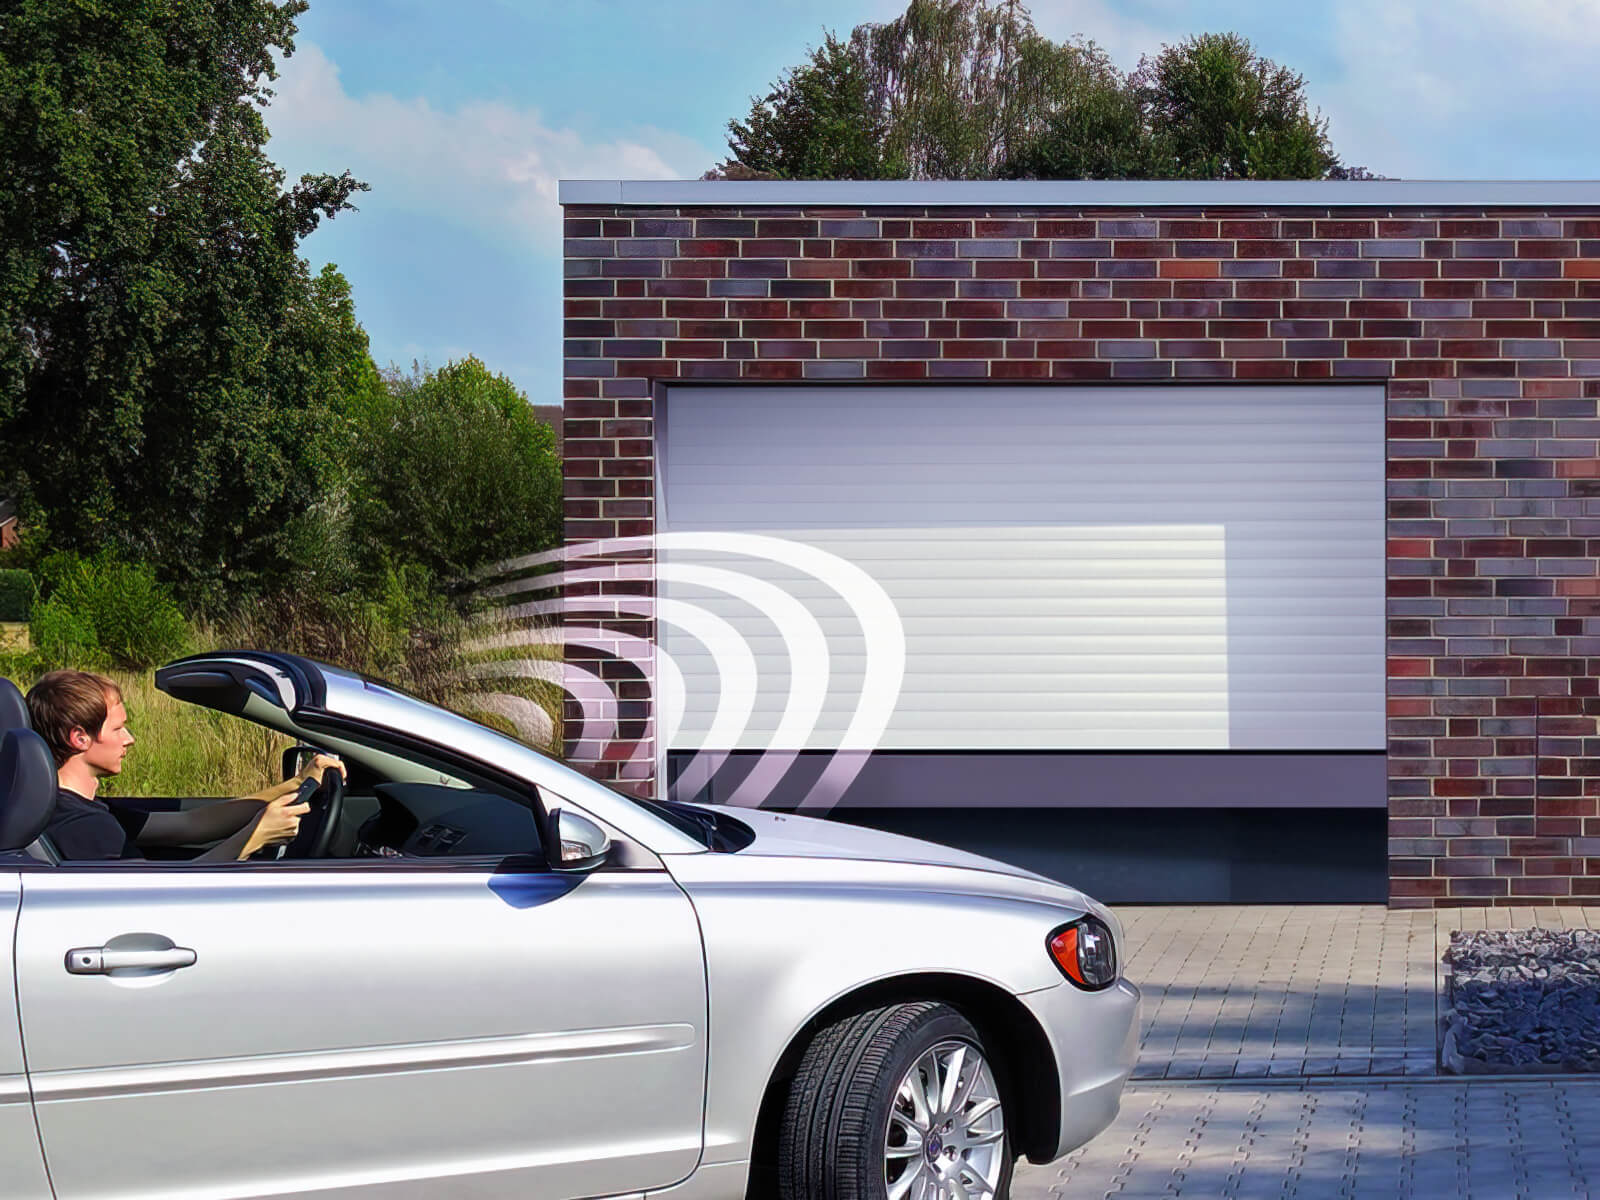 Professional Newton Abbot Electric Garage Door Automation company